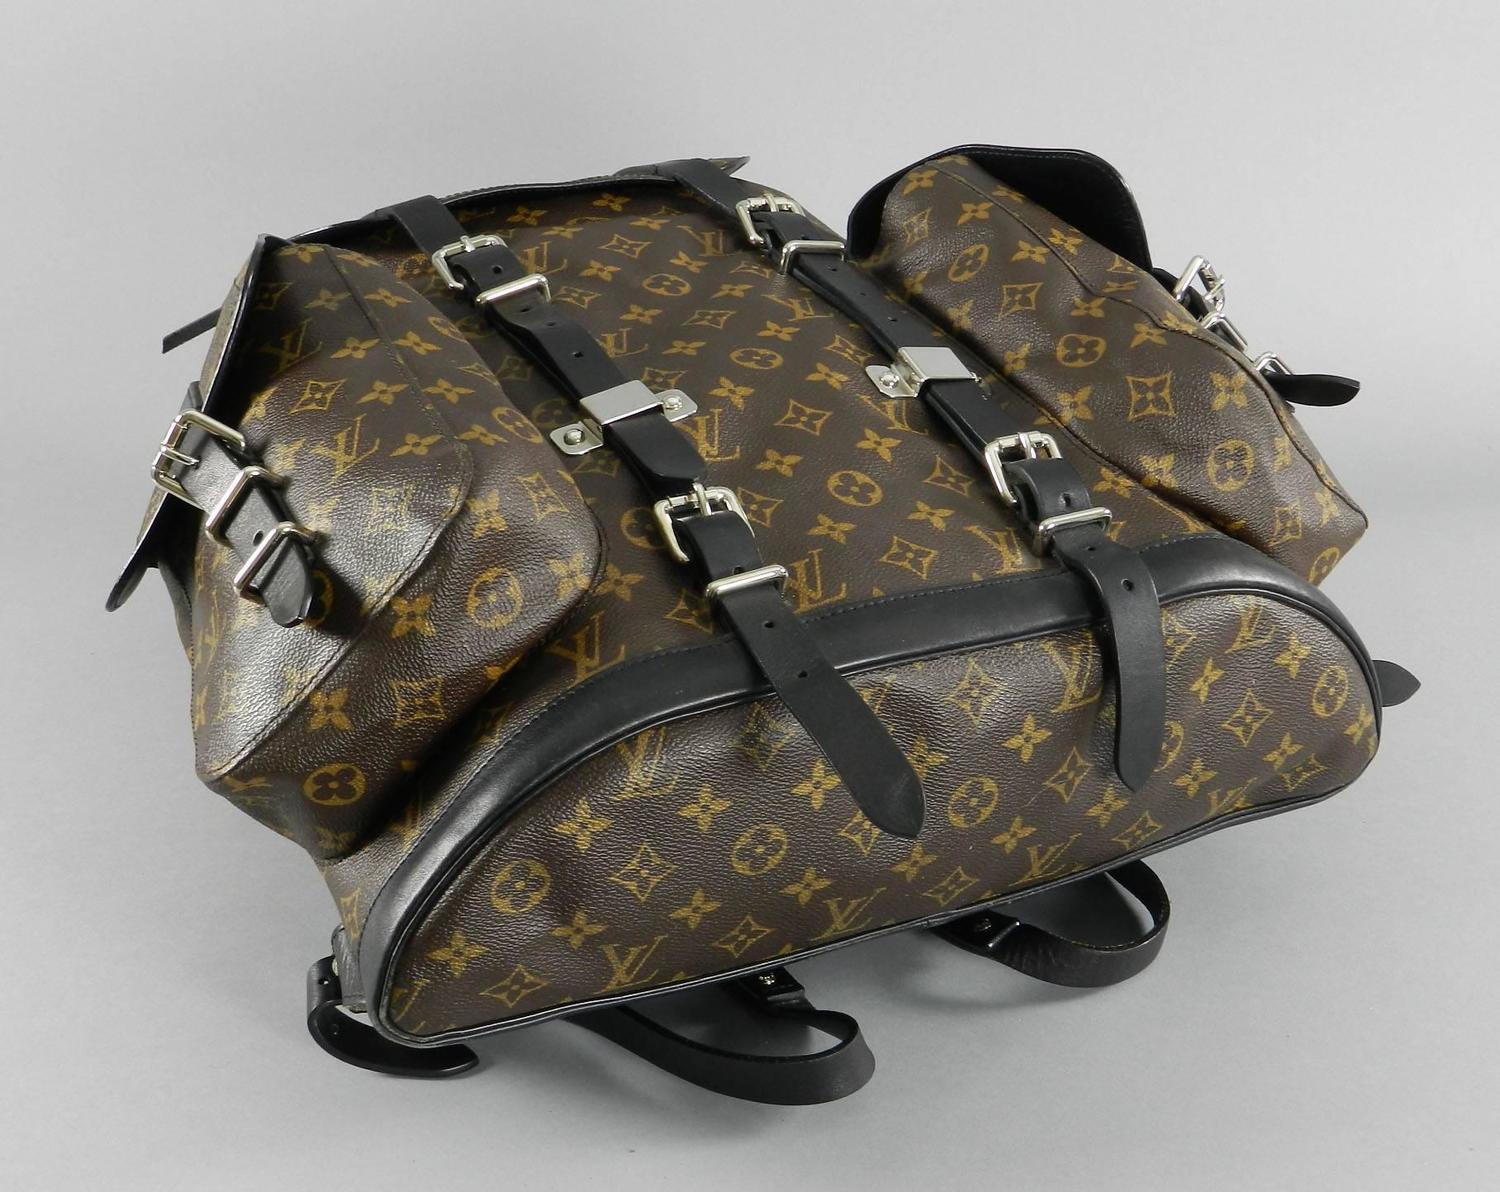 Louis Vuitton's $81,500 Christopher Backpack for Men